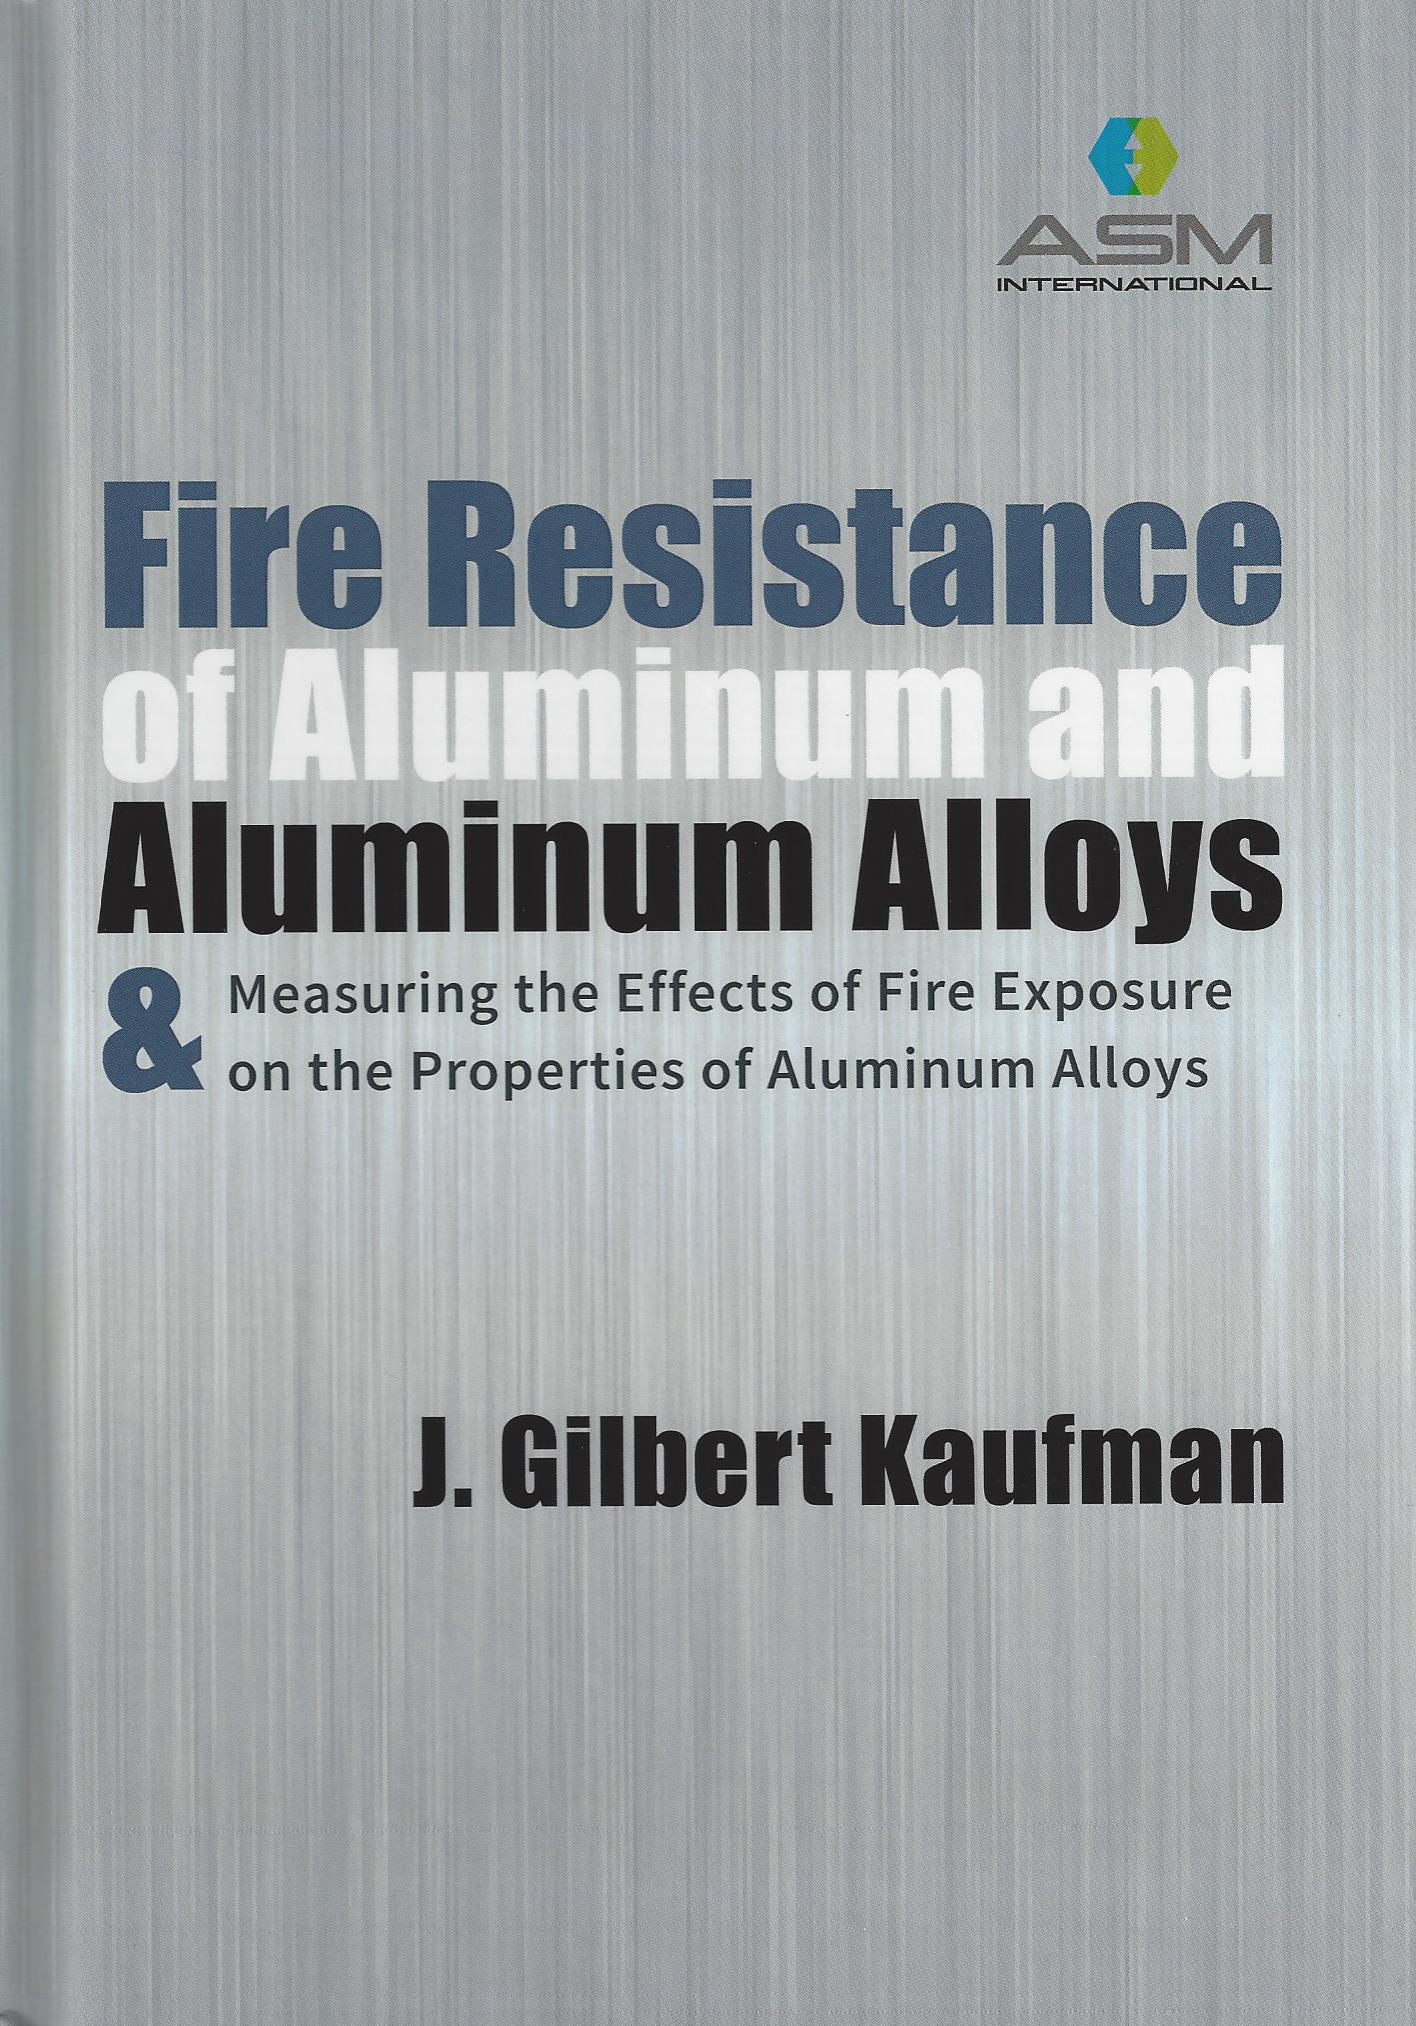 Fire Resistance of Aluminum and Aluminum Alloys and Measuring the Effects of Fire Exposure on the Properties of Aluminum Alloys